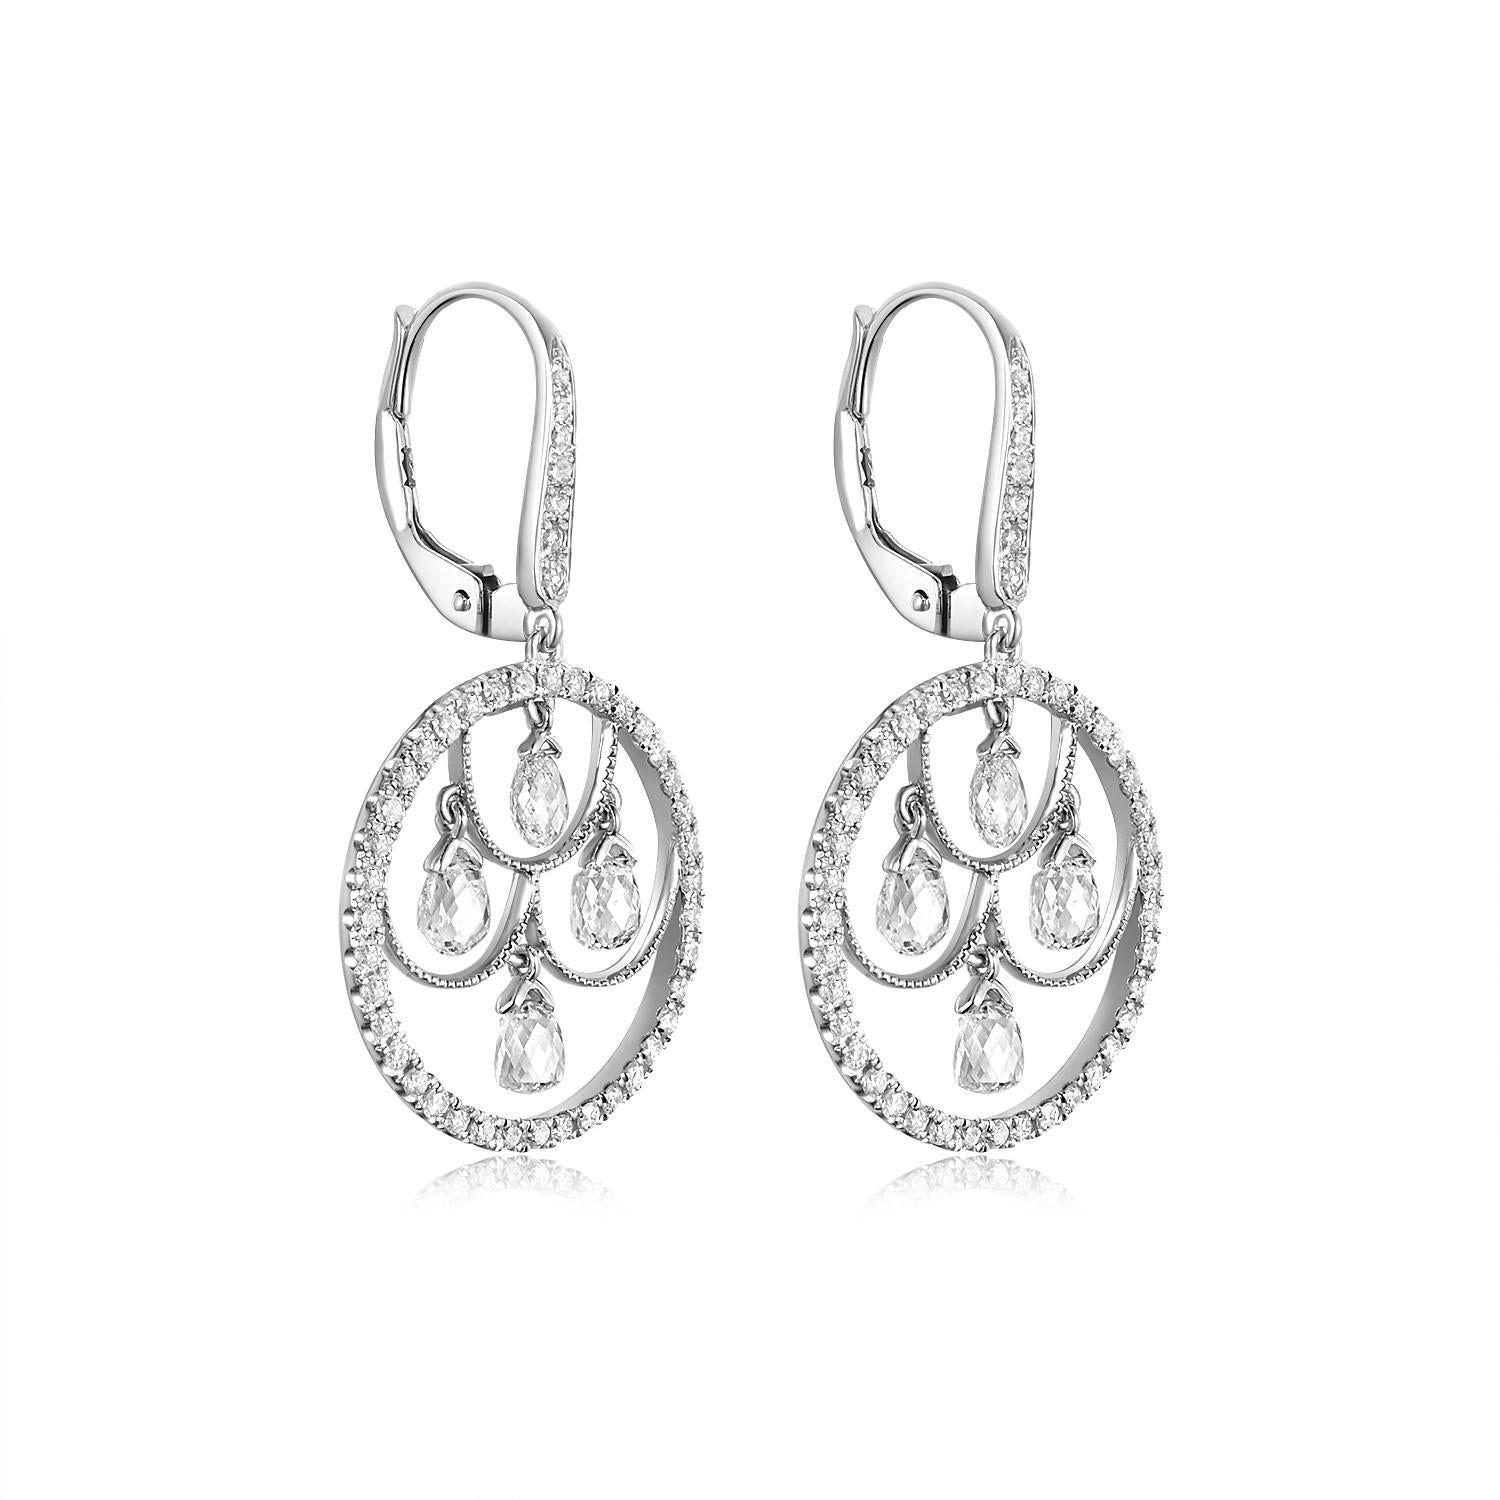 Experience timeless elegance with these enchanting dangle earrings, meticulously crafted in luminous 18 karat white gold. Central to their allure are 8 cascading briolette diamonds, weighing a total of 1.80 carats. Each earring showcases 4 of these